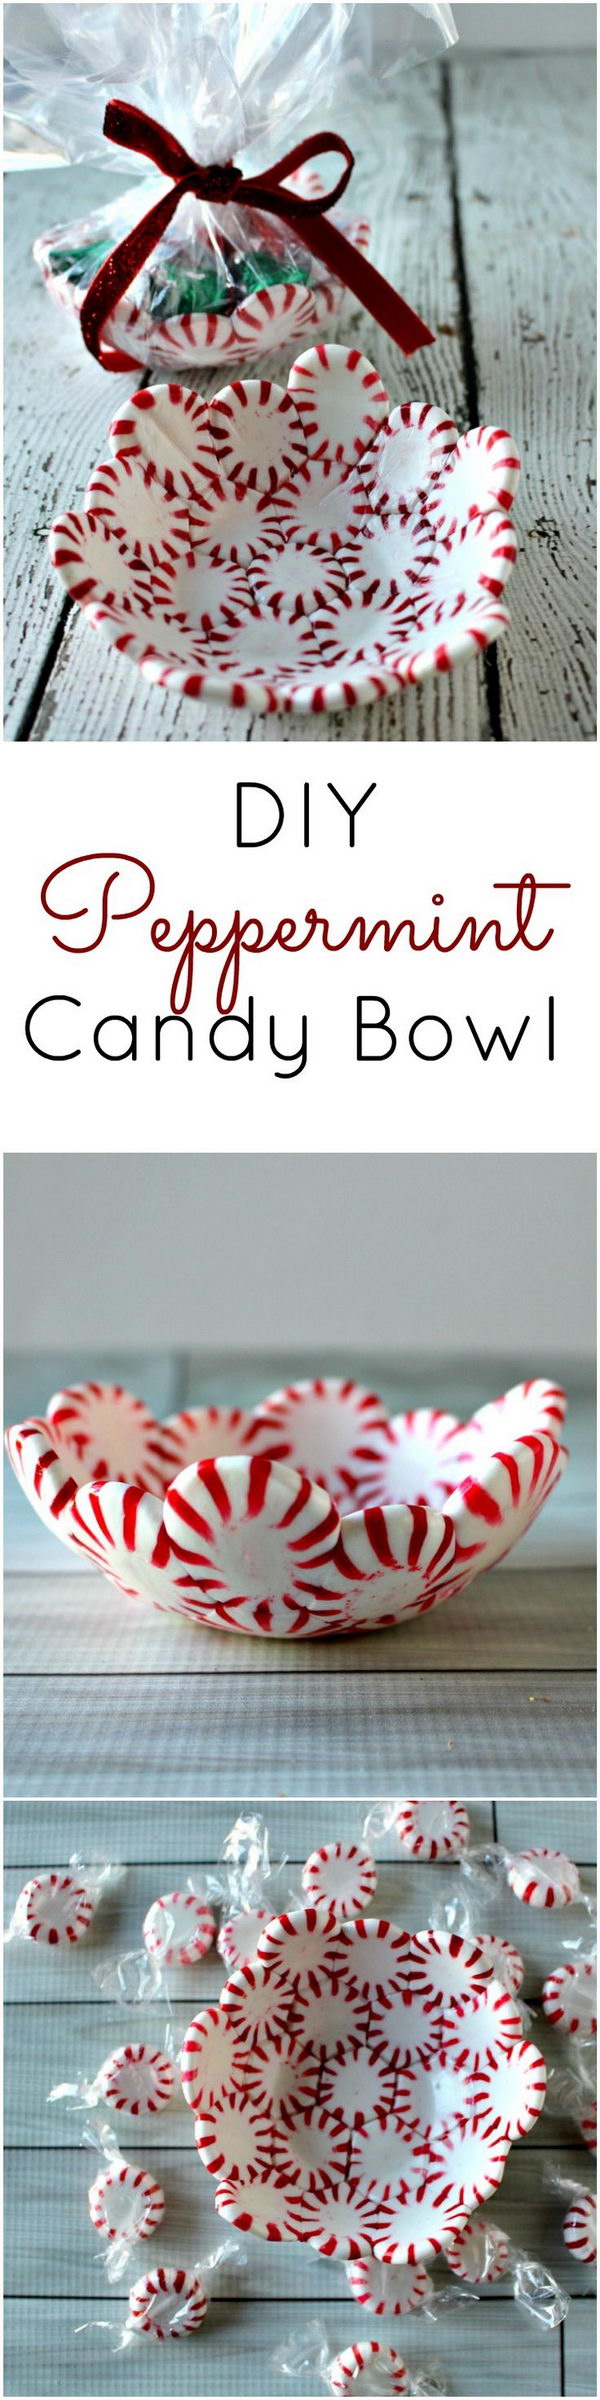 Peppermint Candy Bowl. 